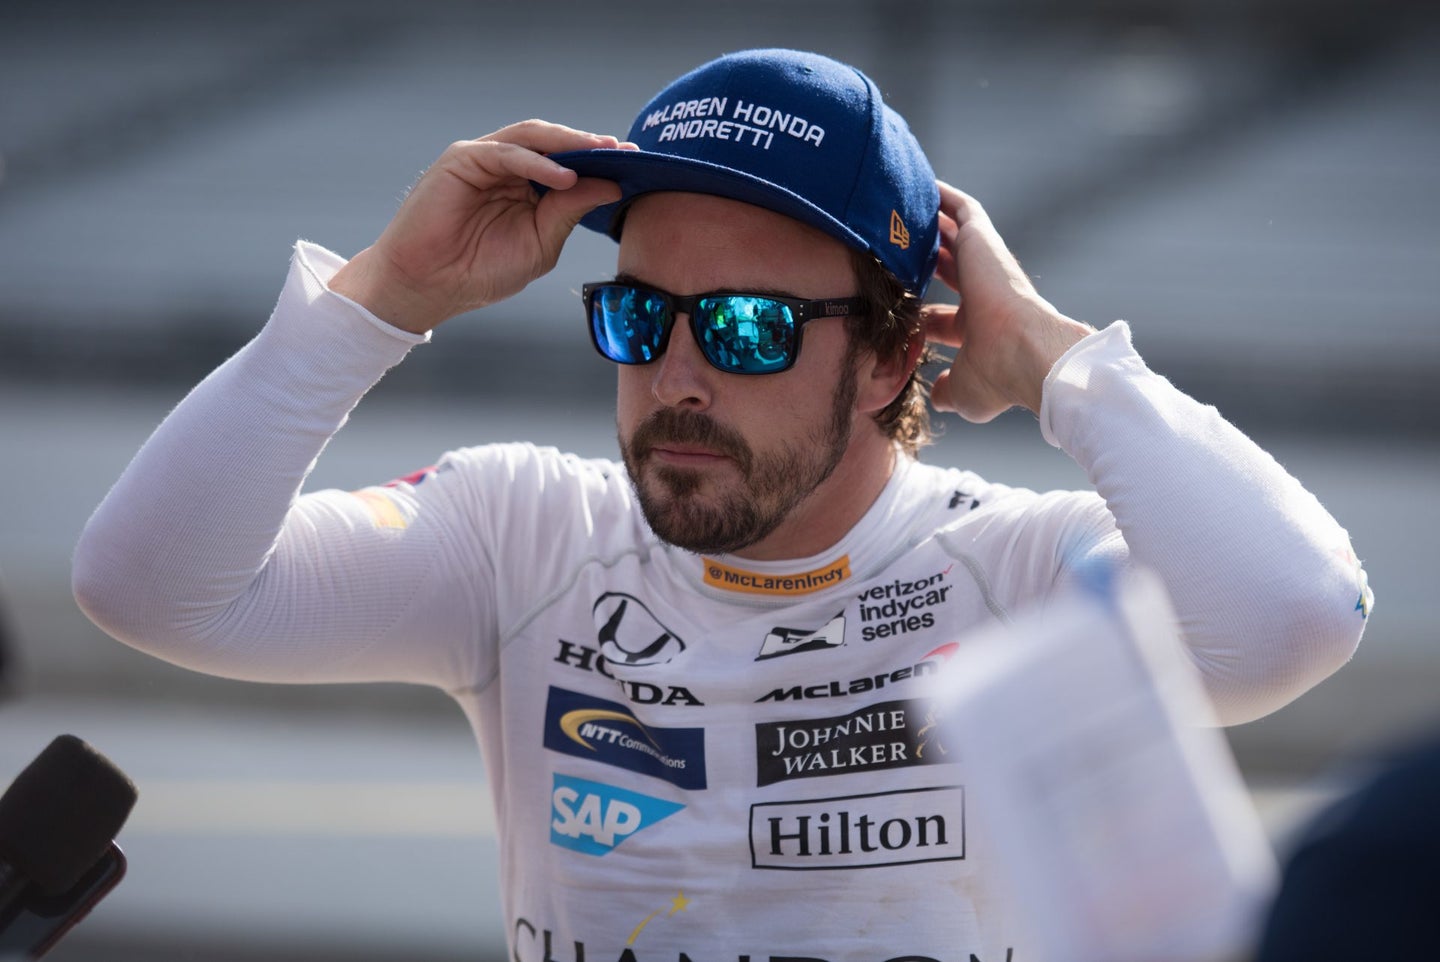 On ‘Fast Friday,’ Alonso Still 4th-Fastest During Indy 500 Practice